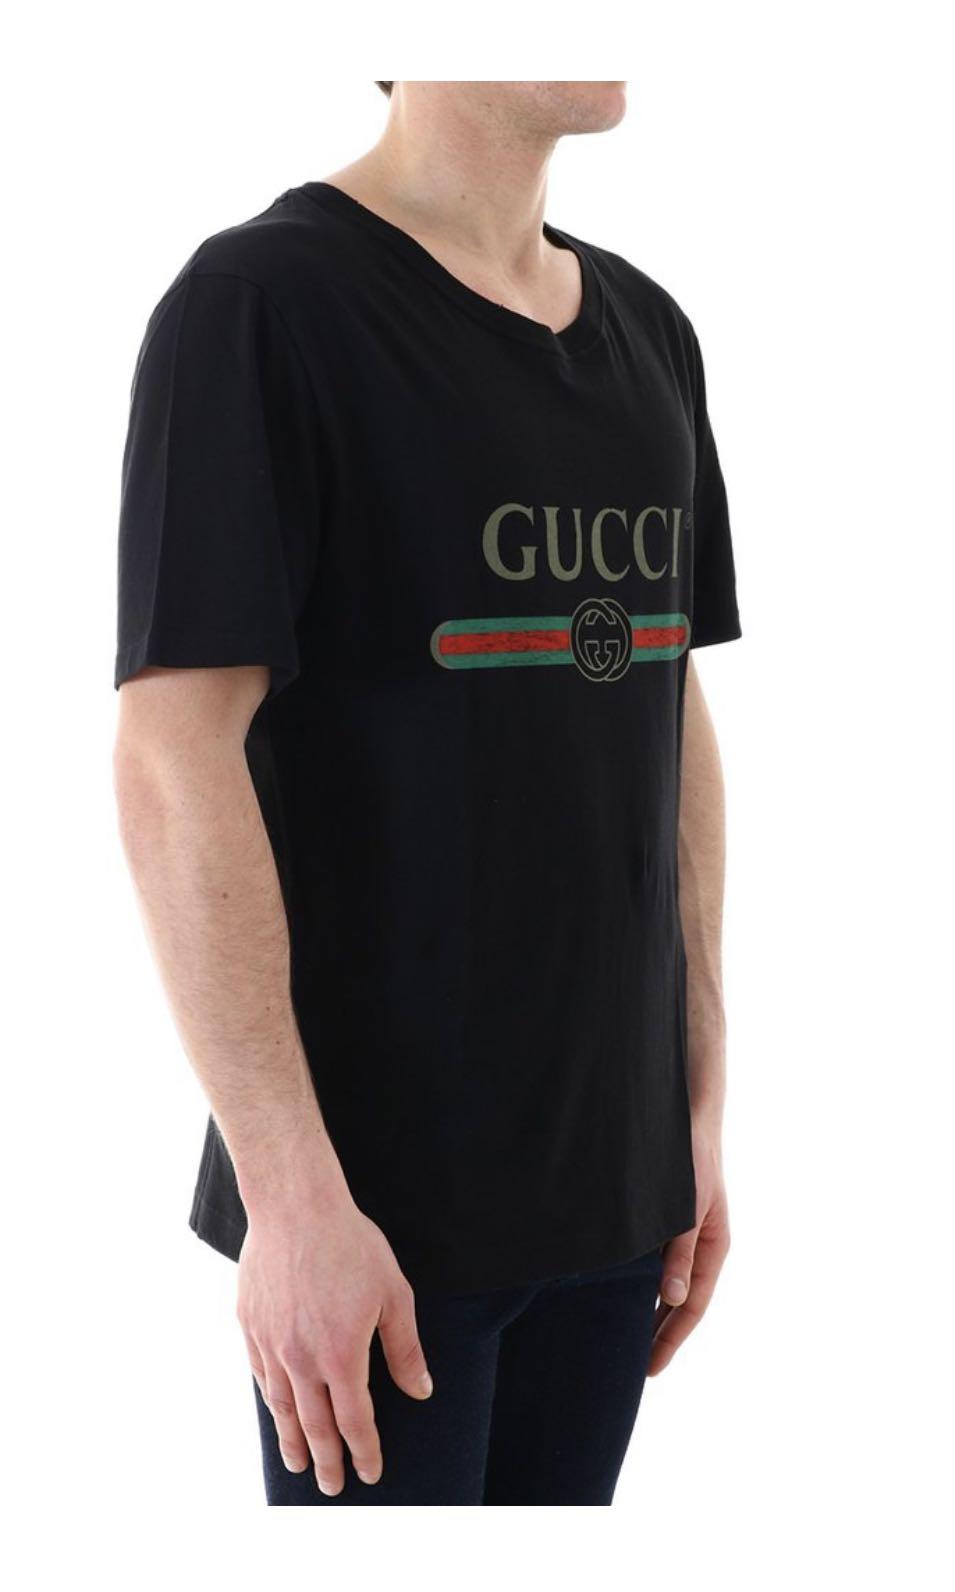 Authentic Gucci Tee Shirt for sale!, Women's Fashion, Tops, Shirts on  Carousell